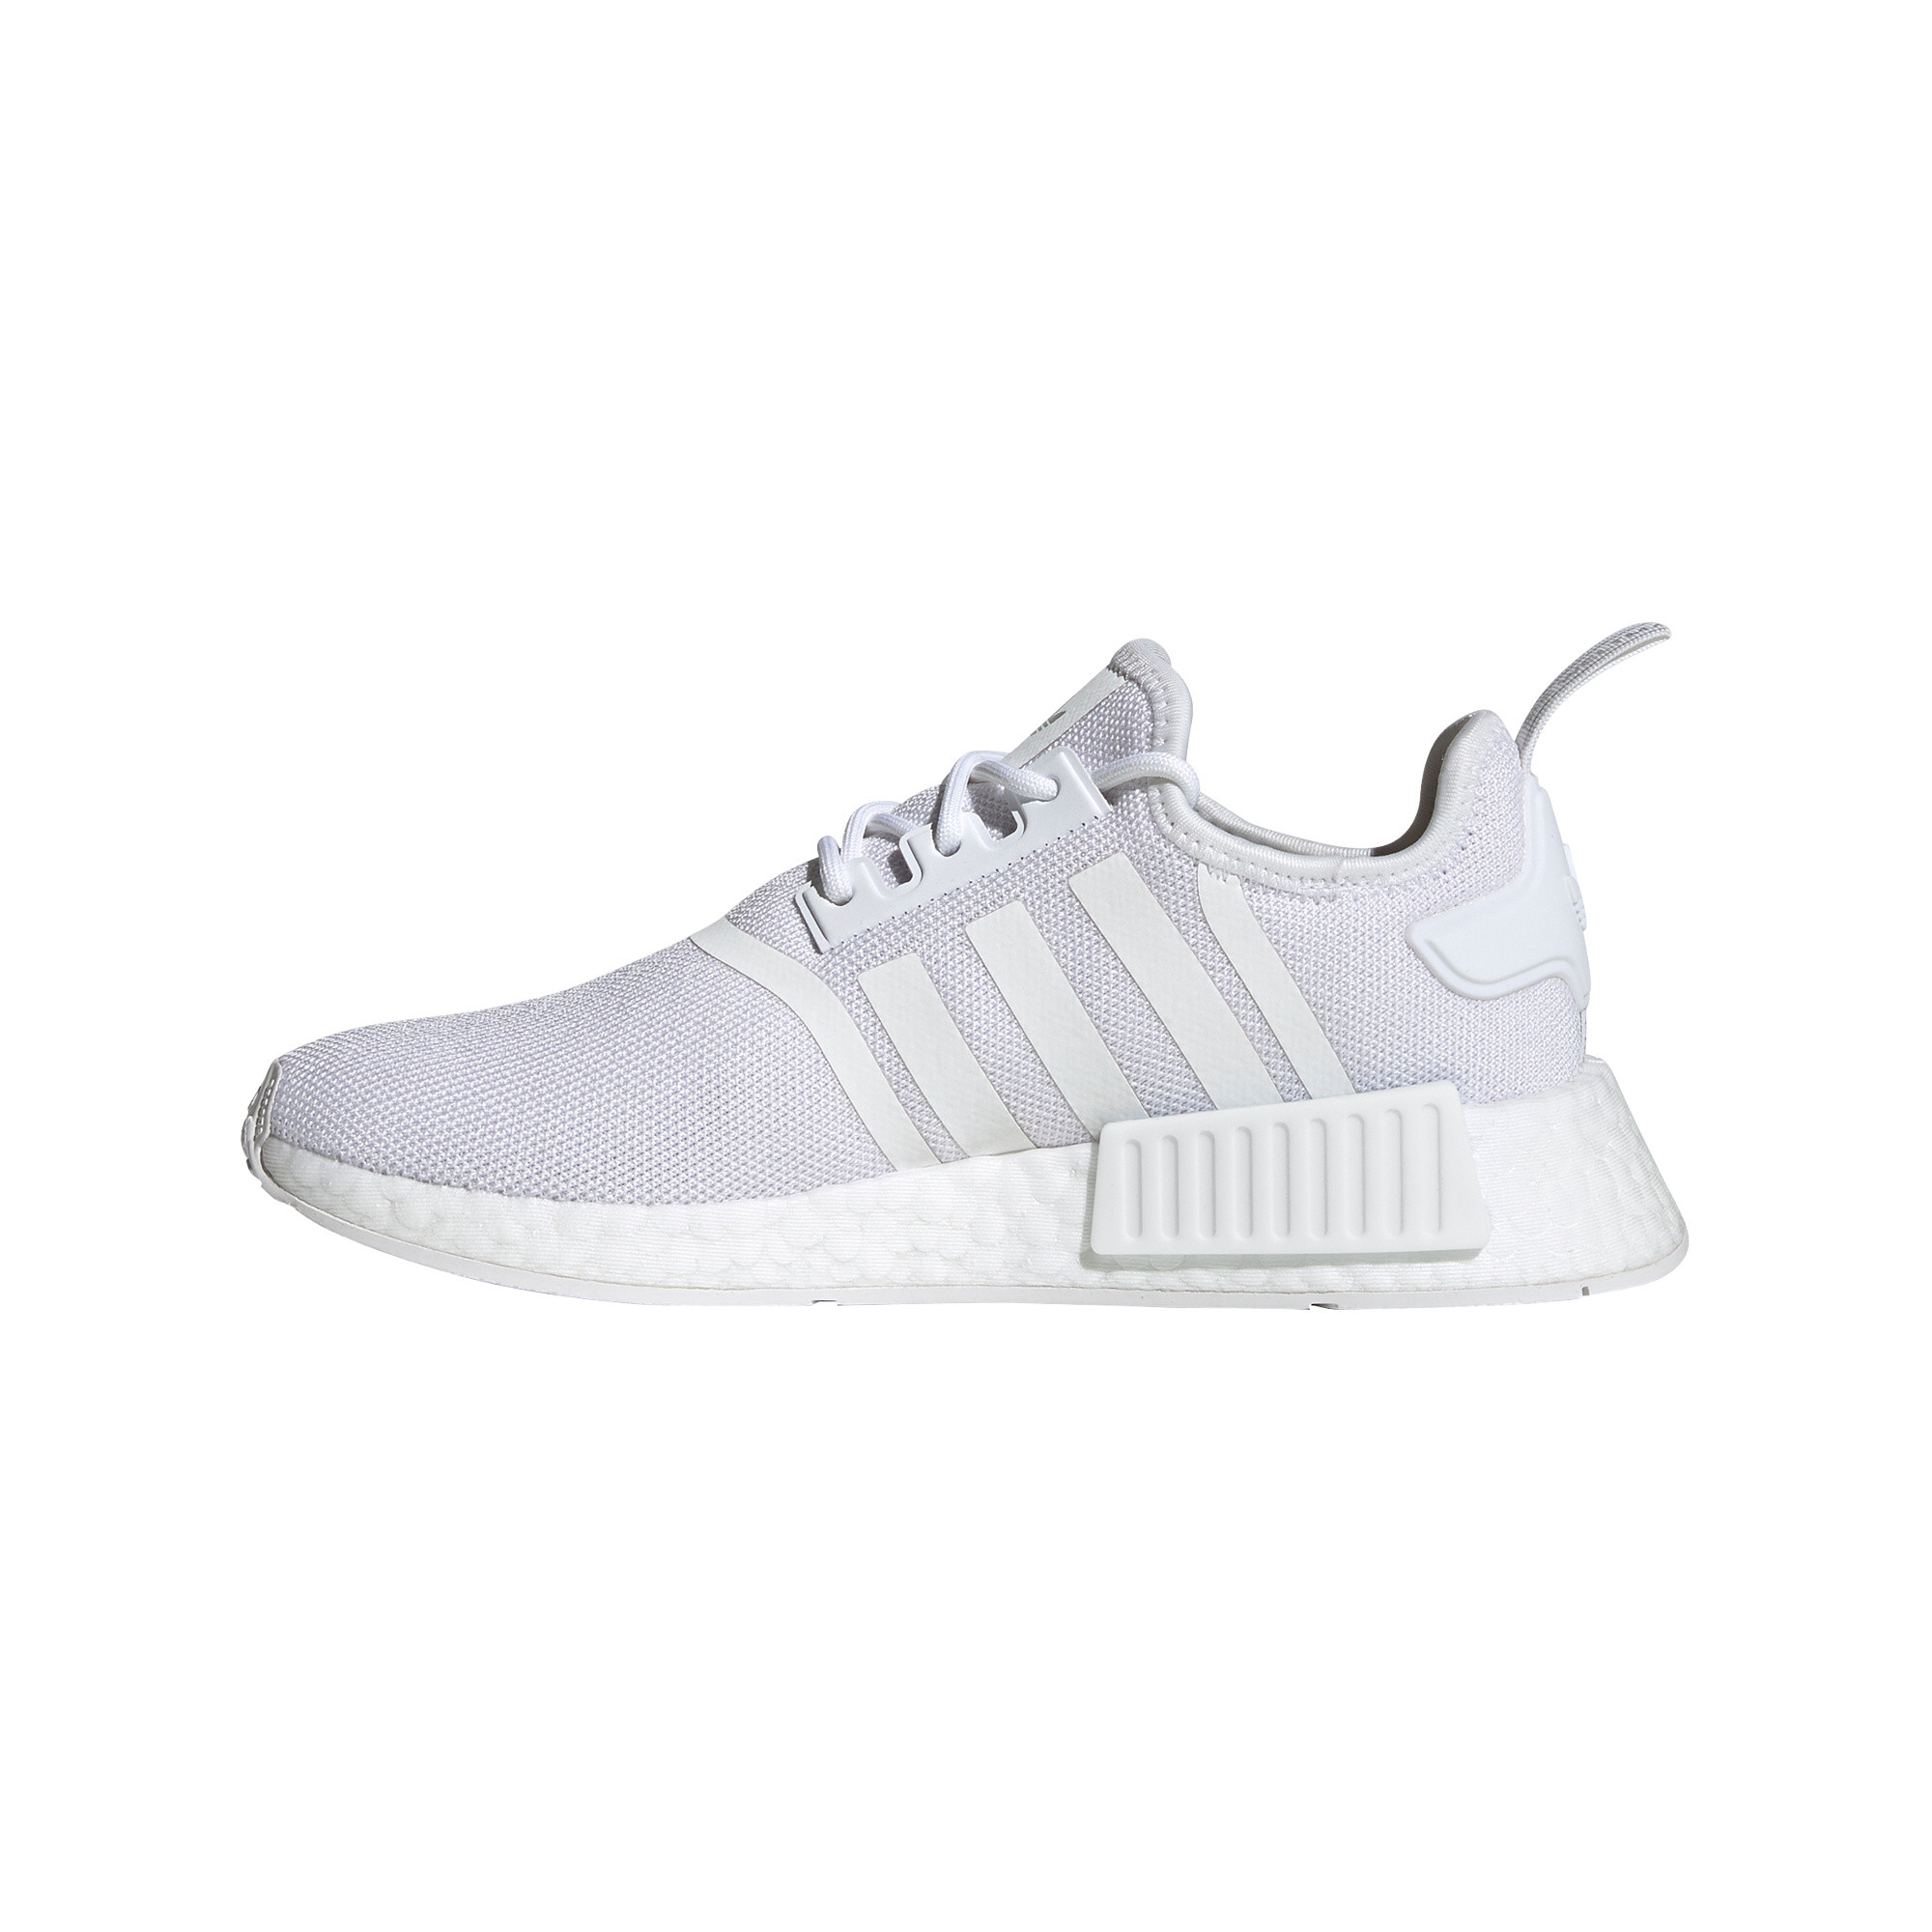 NMD_R1 Primeblue Shoes, White / Grey, large image number 9